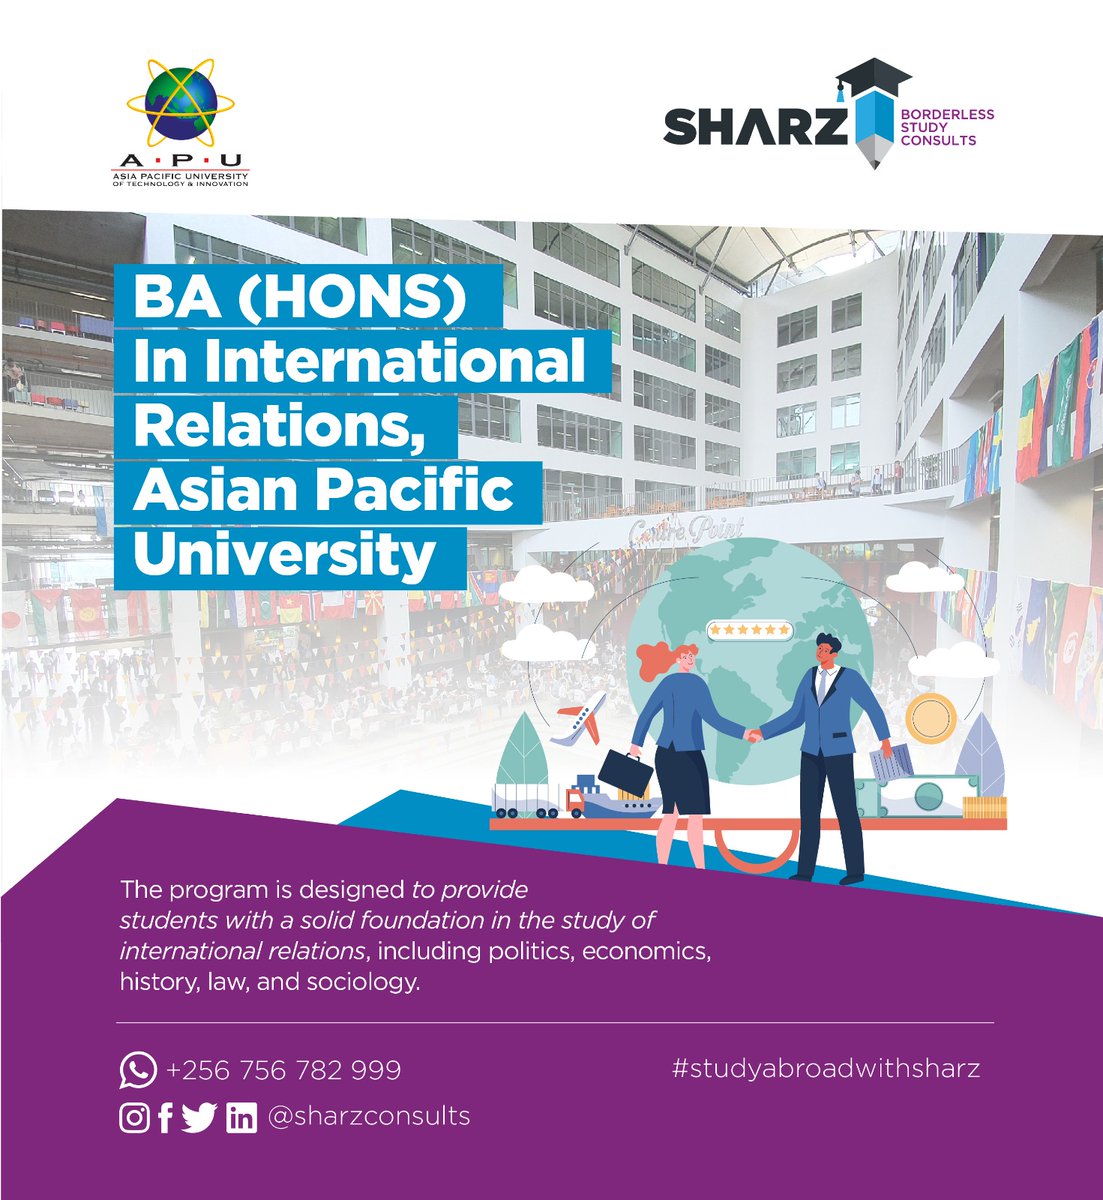 Take your passion for global issues to the next level with a BA (HONS) in International Relations at @AsiaPacificU. 🌐🌍👥🌎

Start the journey today by clicking 👉 sharzconsults.com/register   

#studyabroadwithsharz #studyabroad #studyinmalaysia